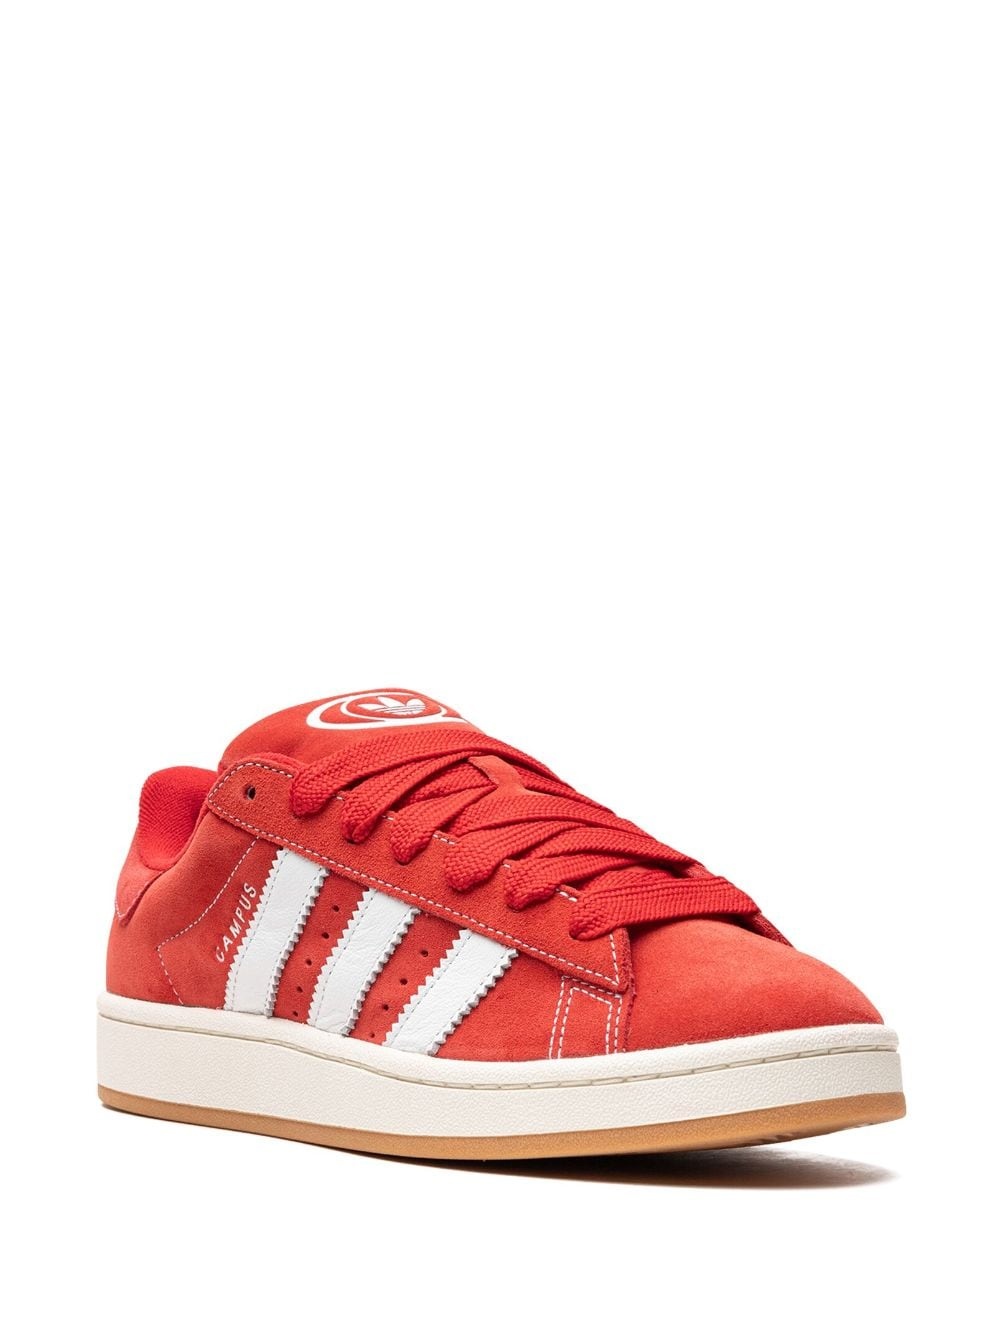 Campus 00s "Better Scarlet/Cloud White" sneakers - 2